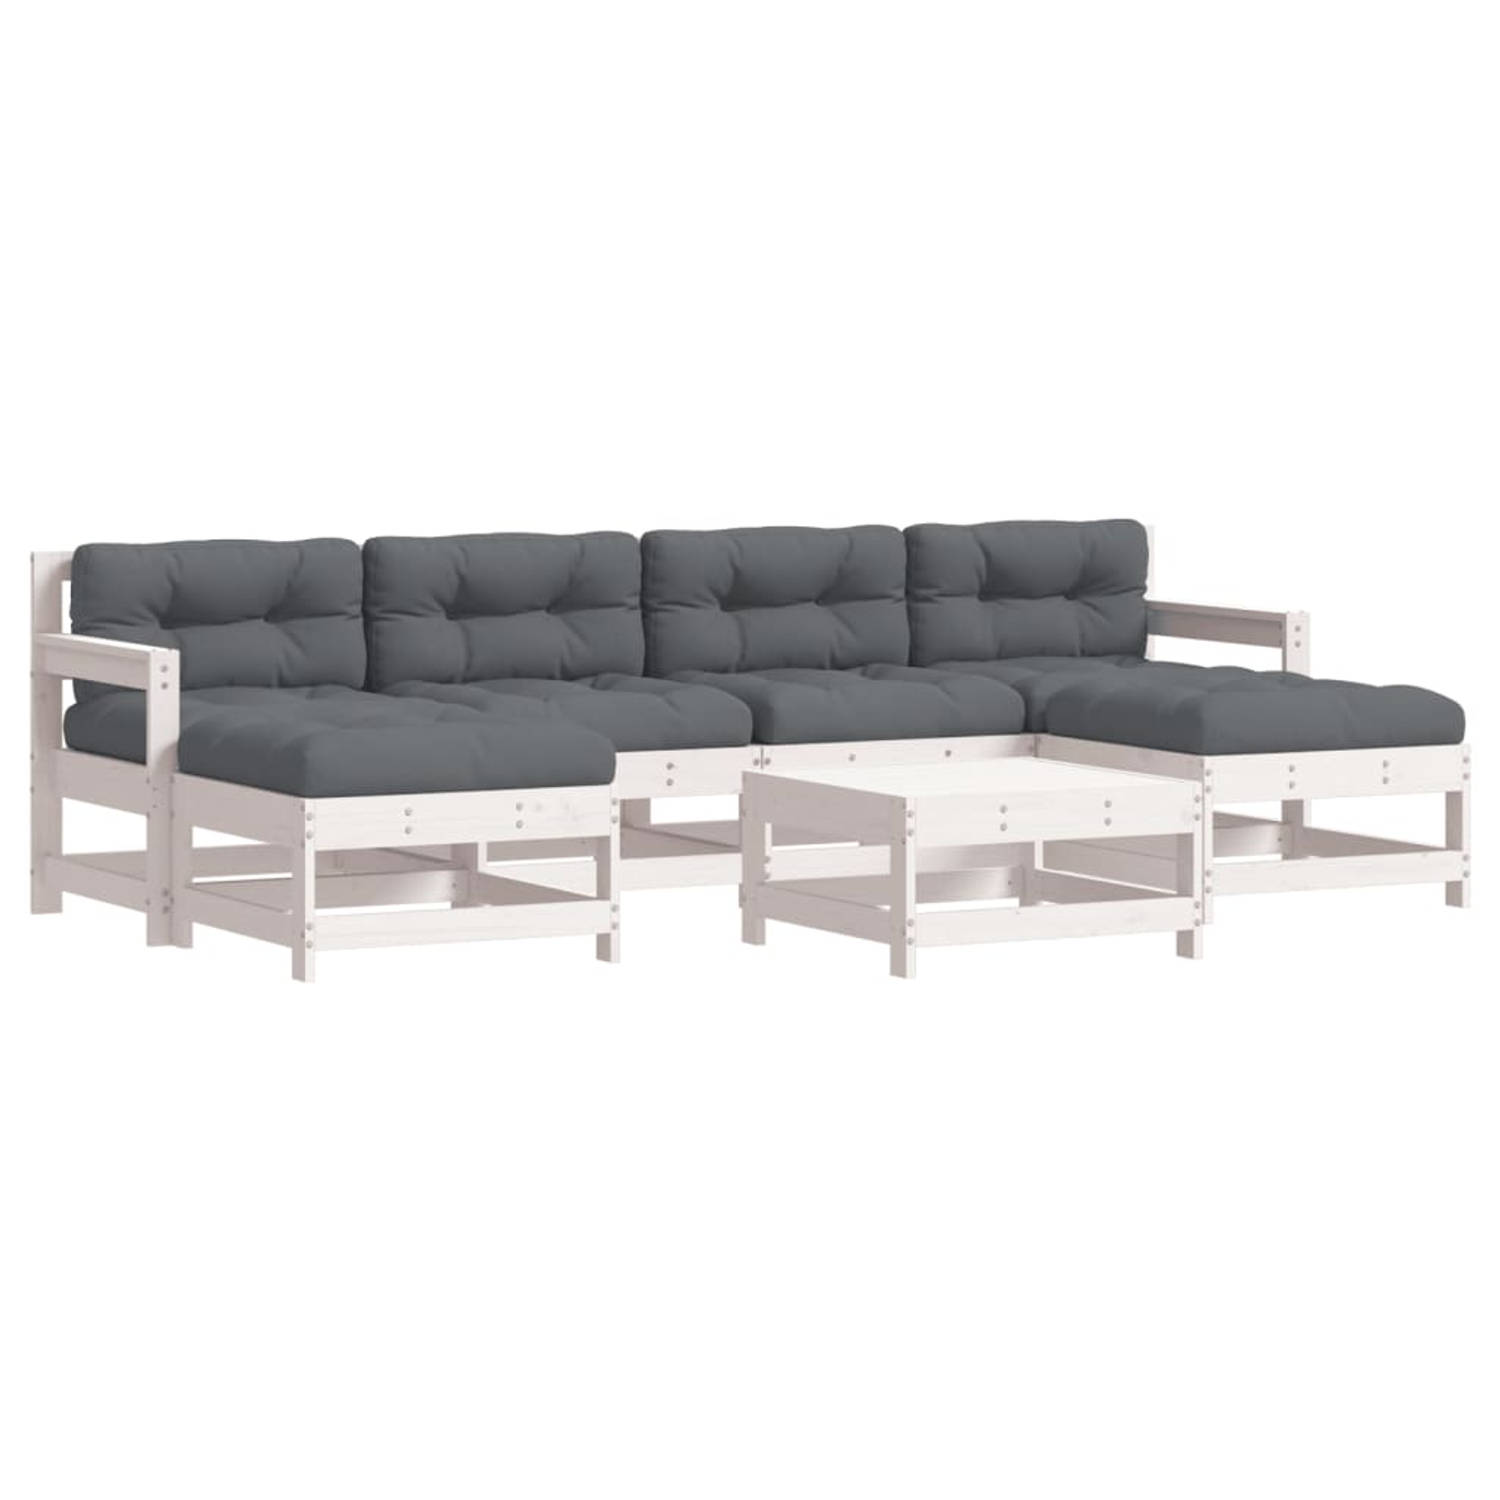 The Living Store Loungeset Hout - Wit - Grenenhout - Modulair - 110 kg